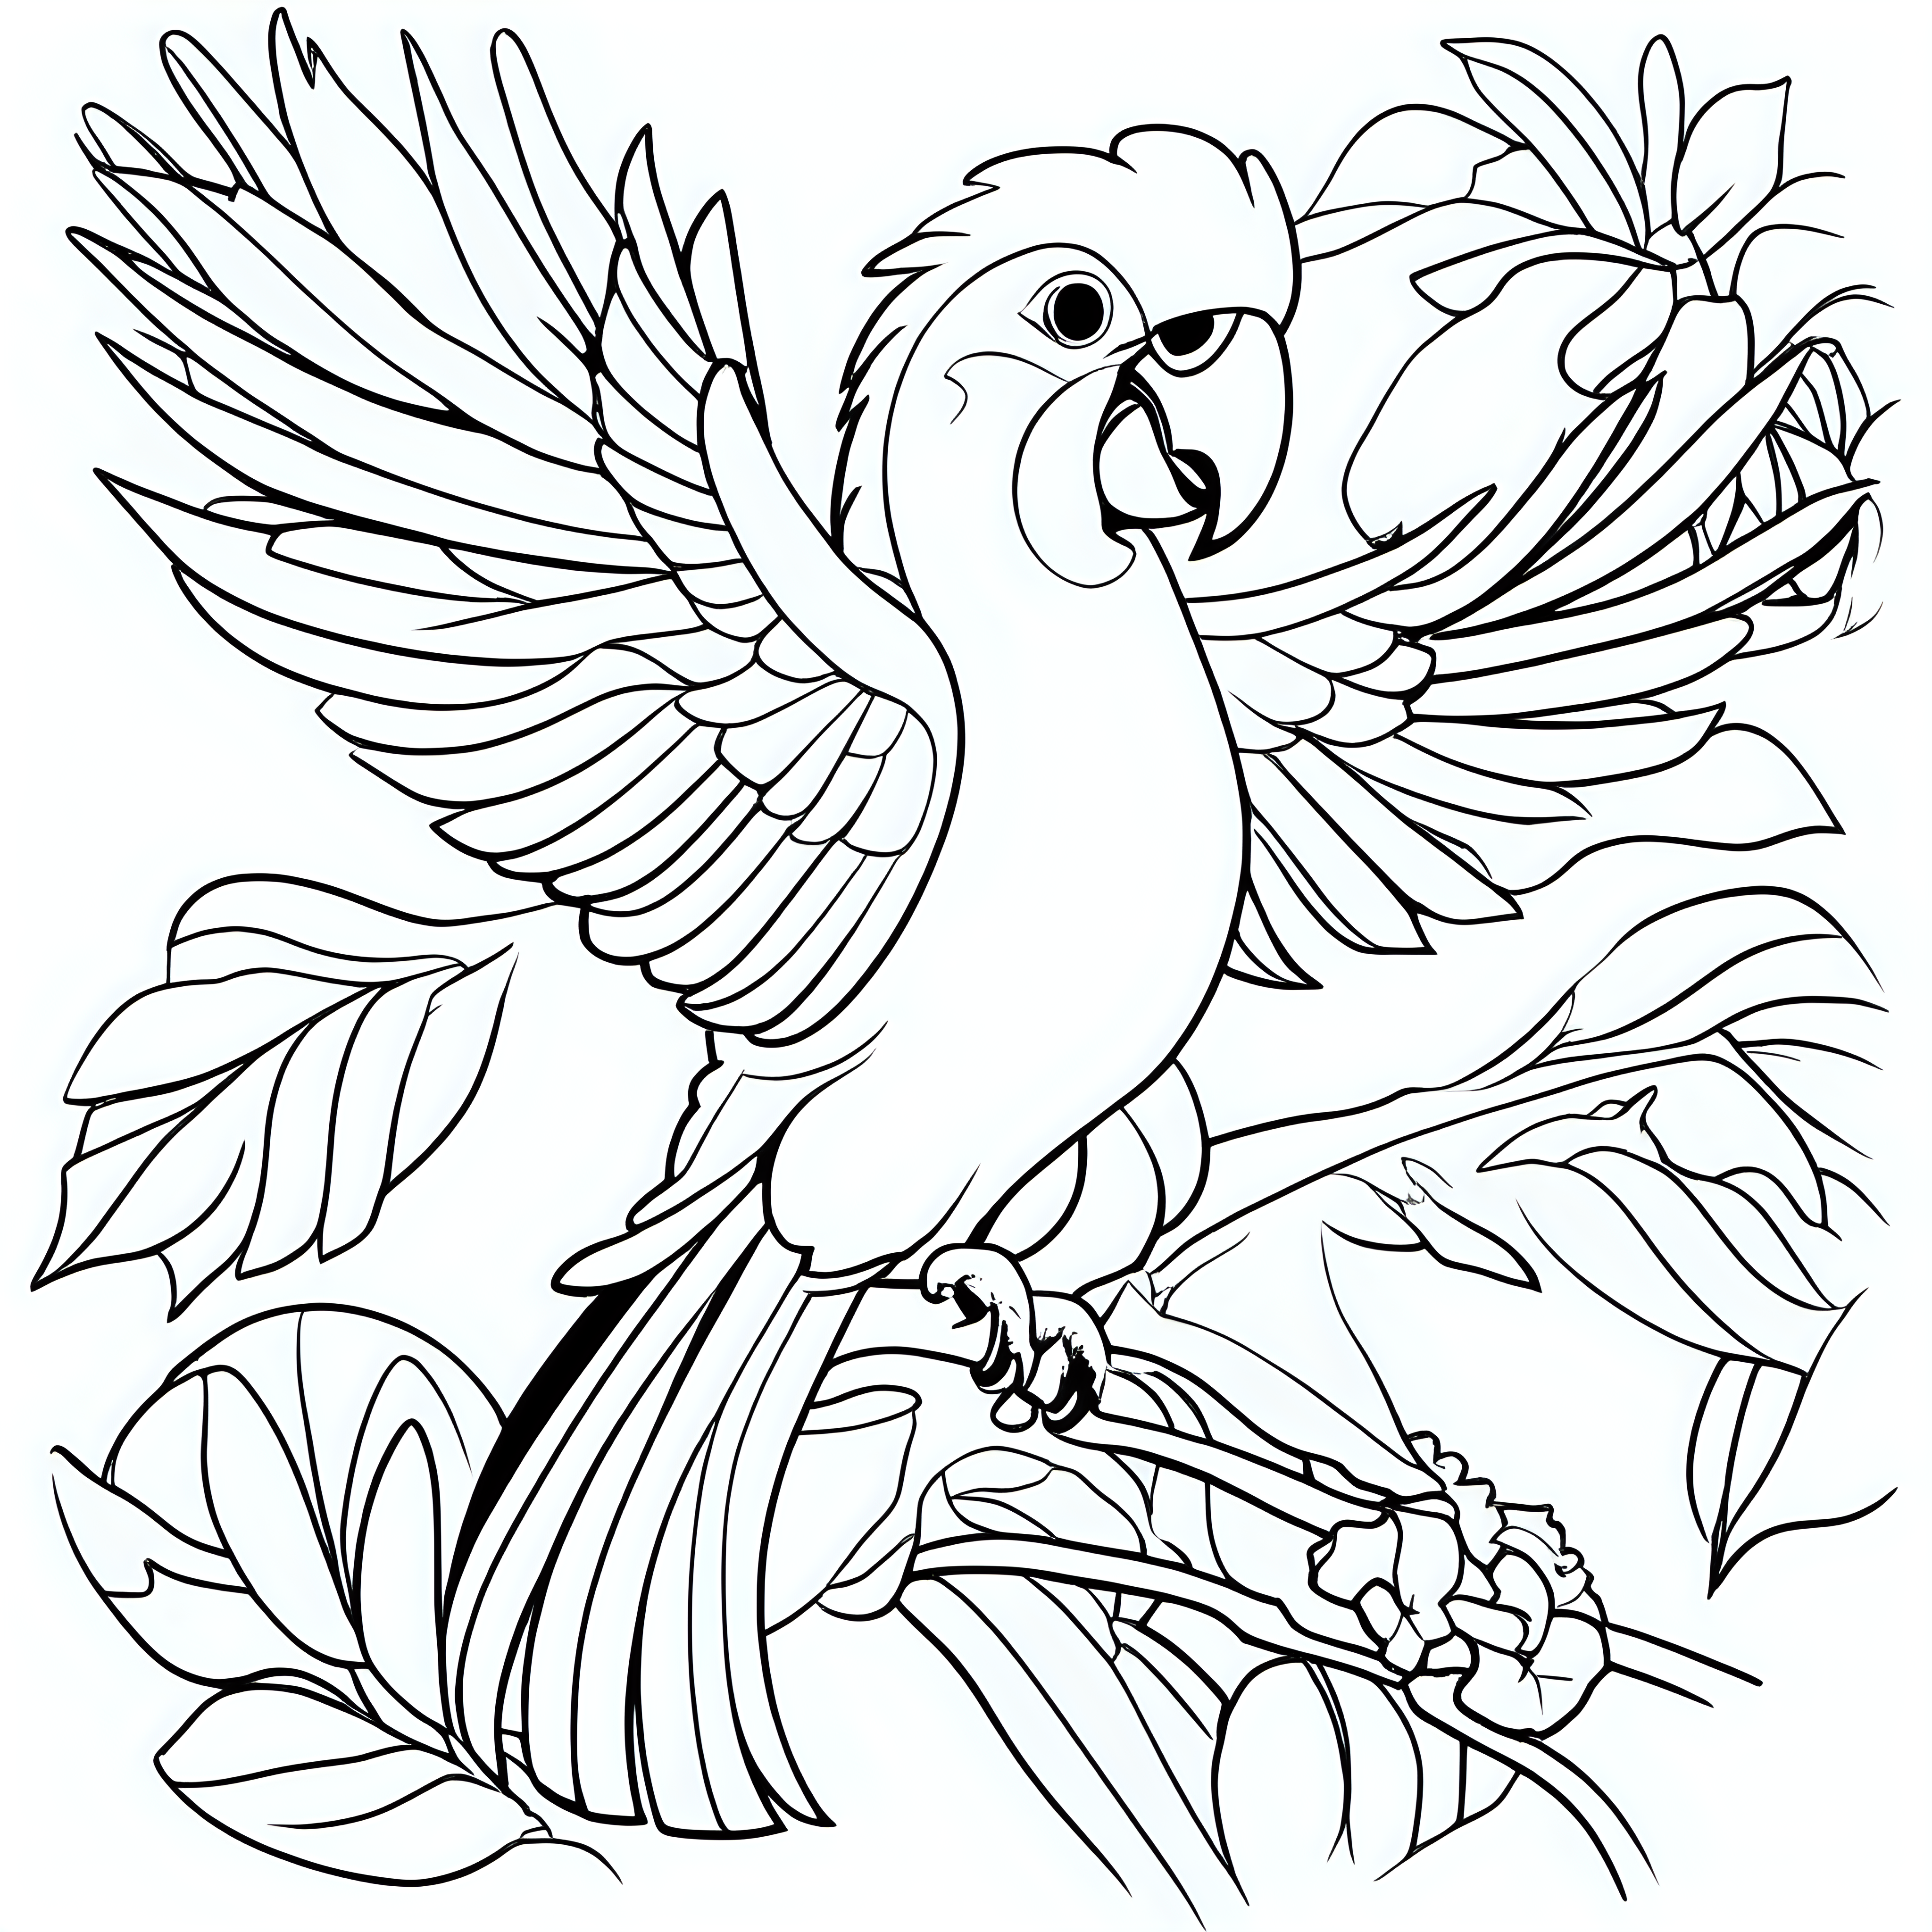 Craft a delightful black outline of a cute Hyacinth macaw, exclusively designed for a children's coloring book. This charming illustration leaves ample space for kids to unleash their creativity and add vibrant colors, making the coloring experience both engaging and delightful.